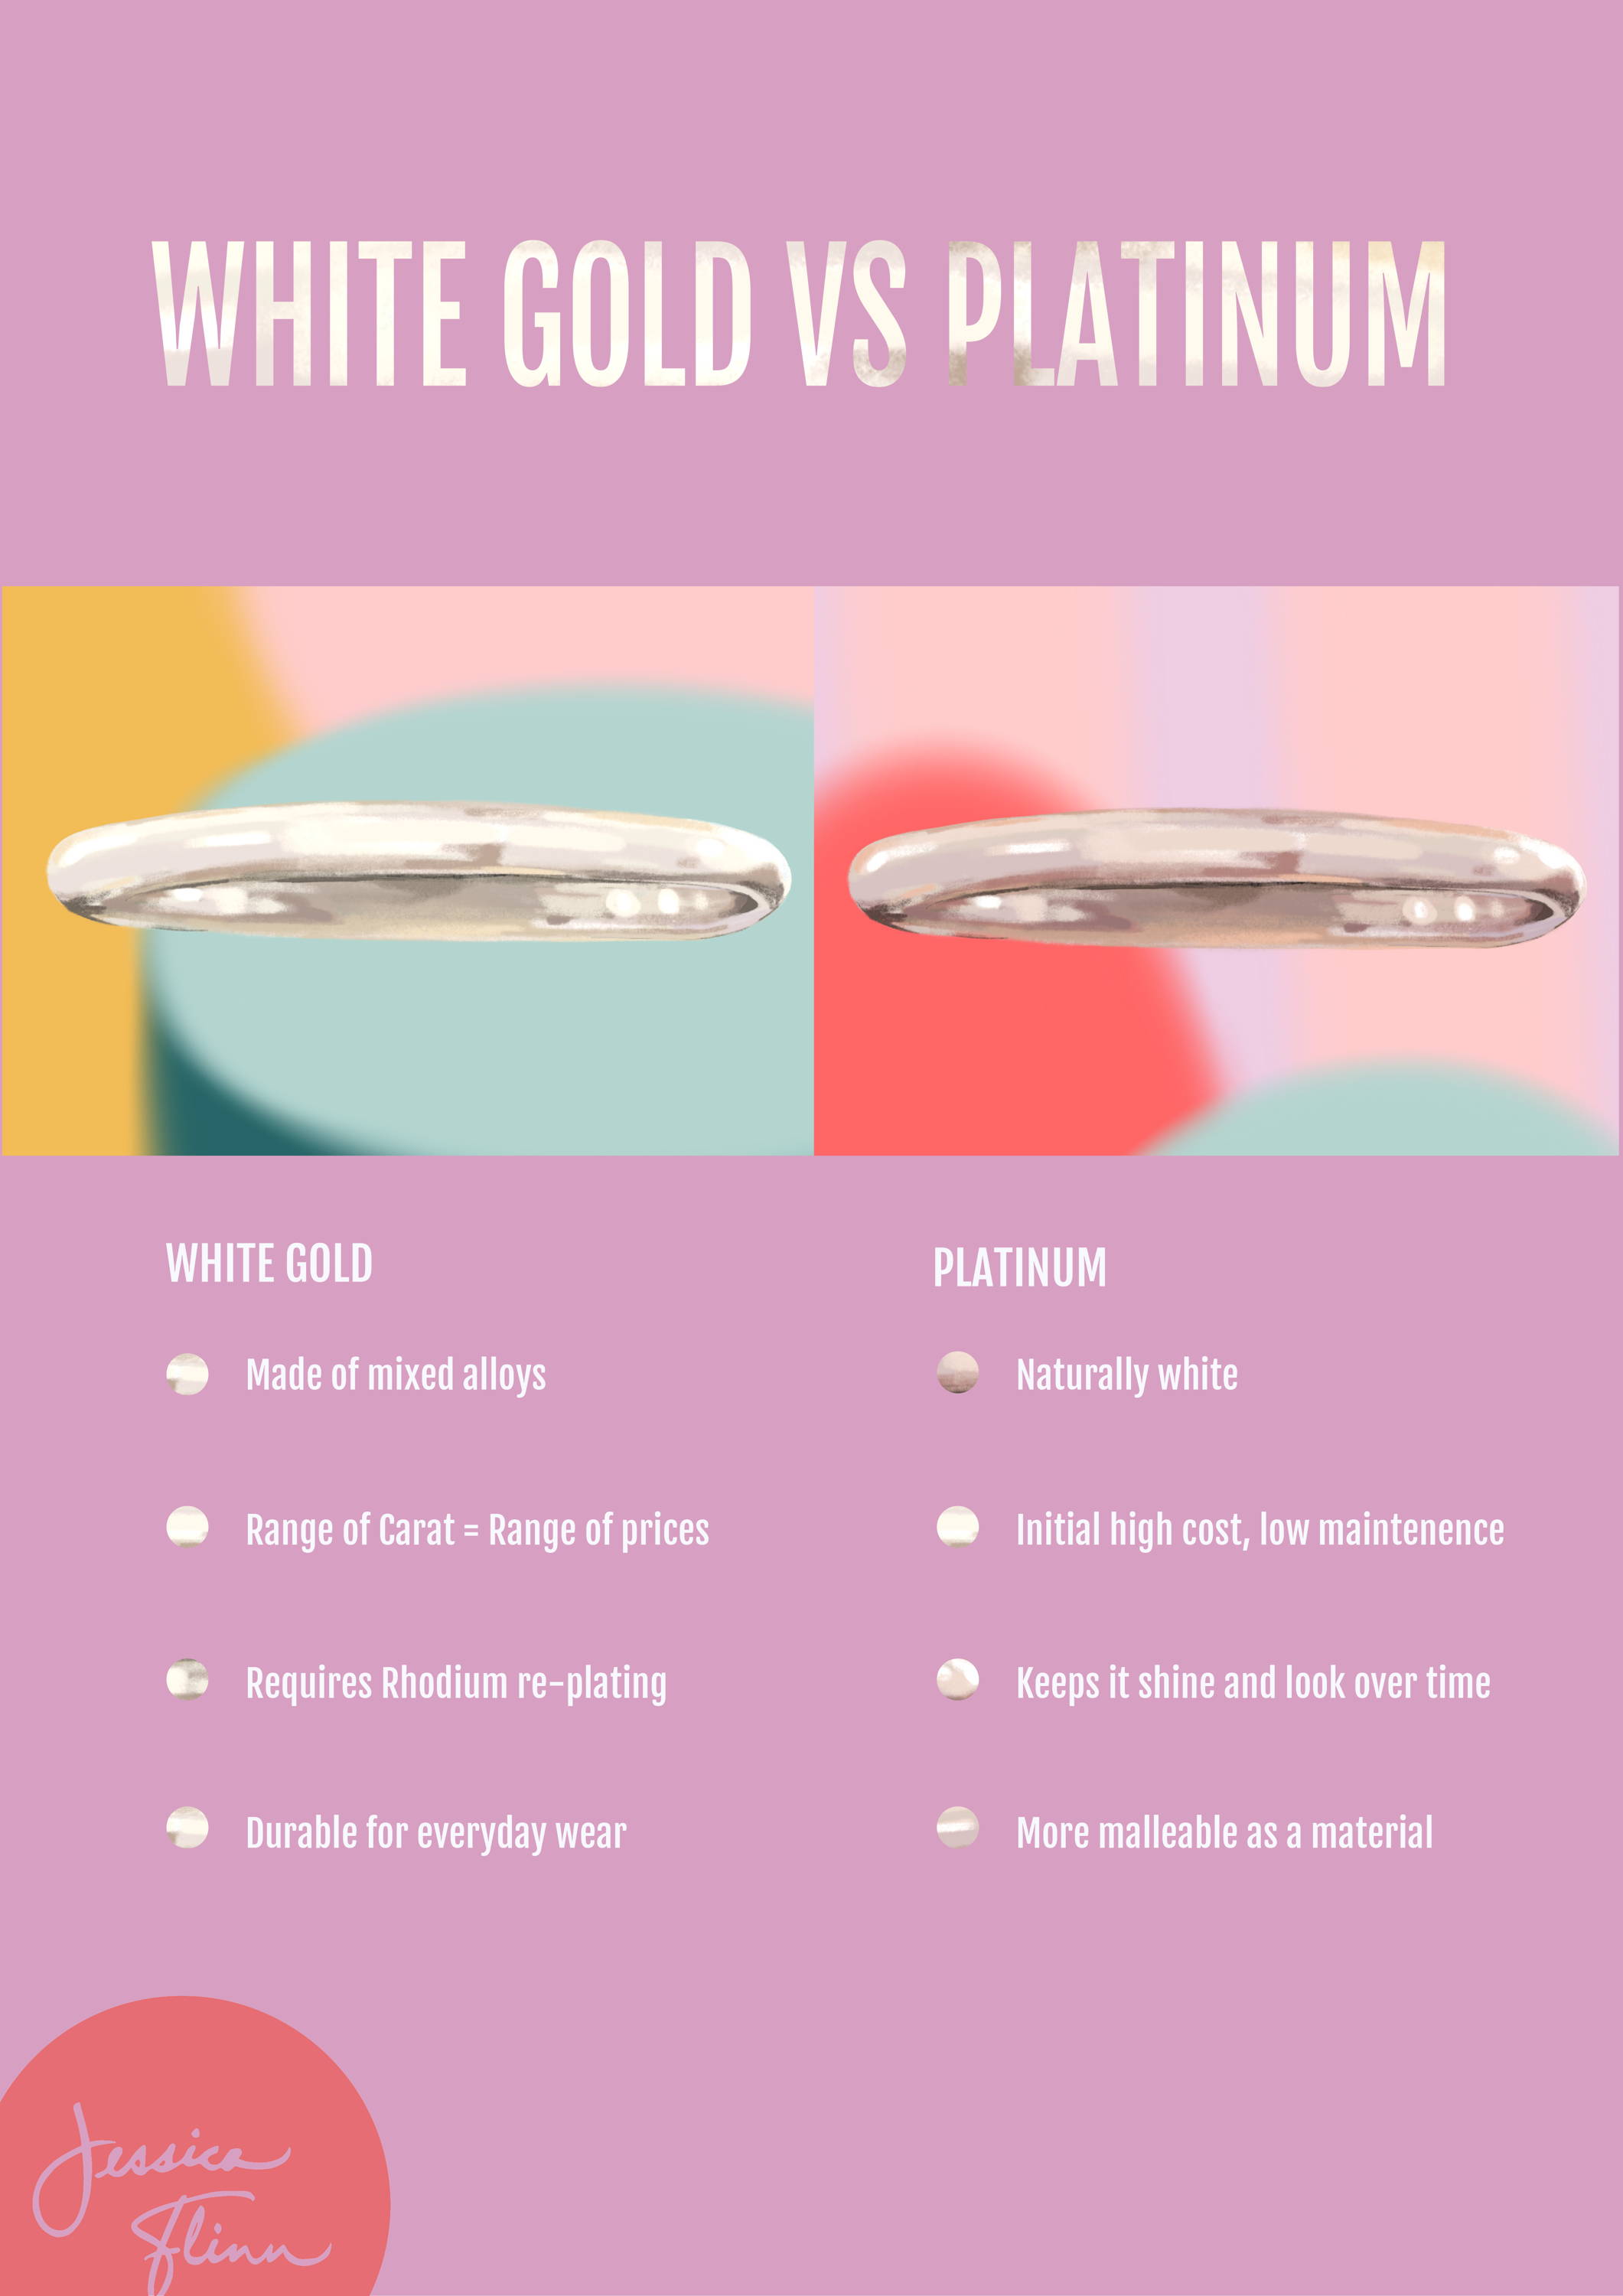 An infographic explaining the key differences between white gold and platinum as bullet point text over image.